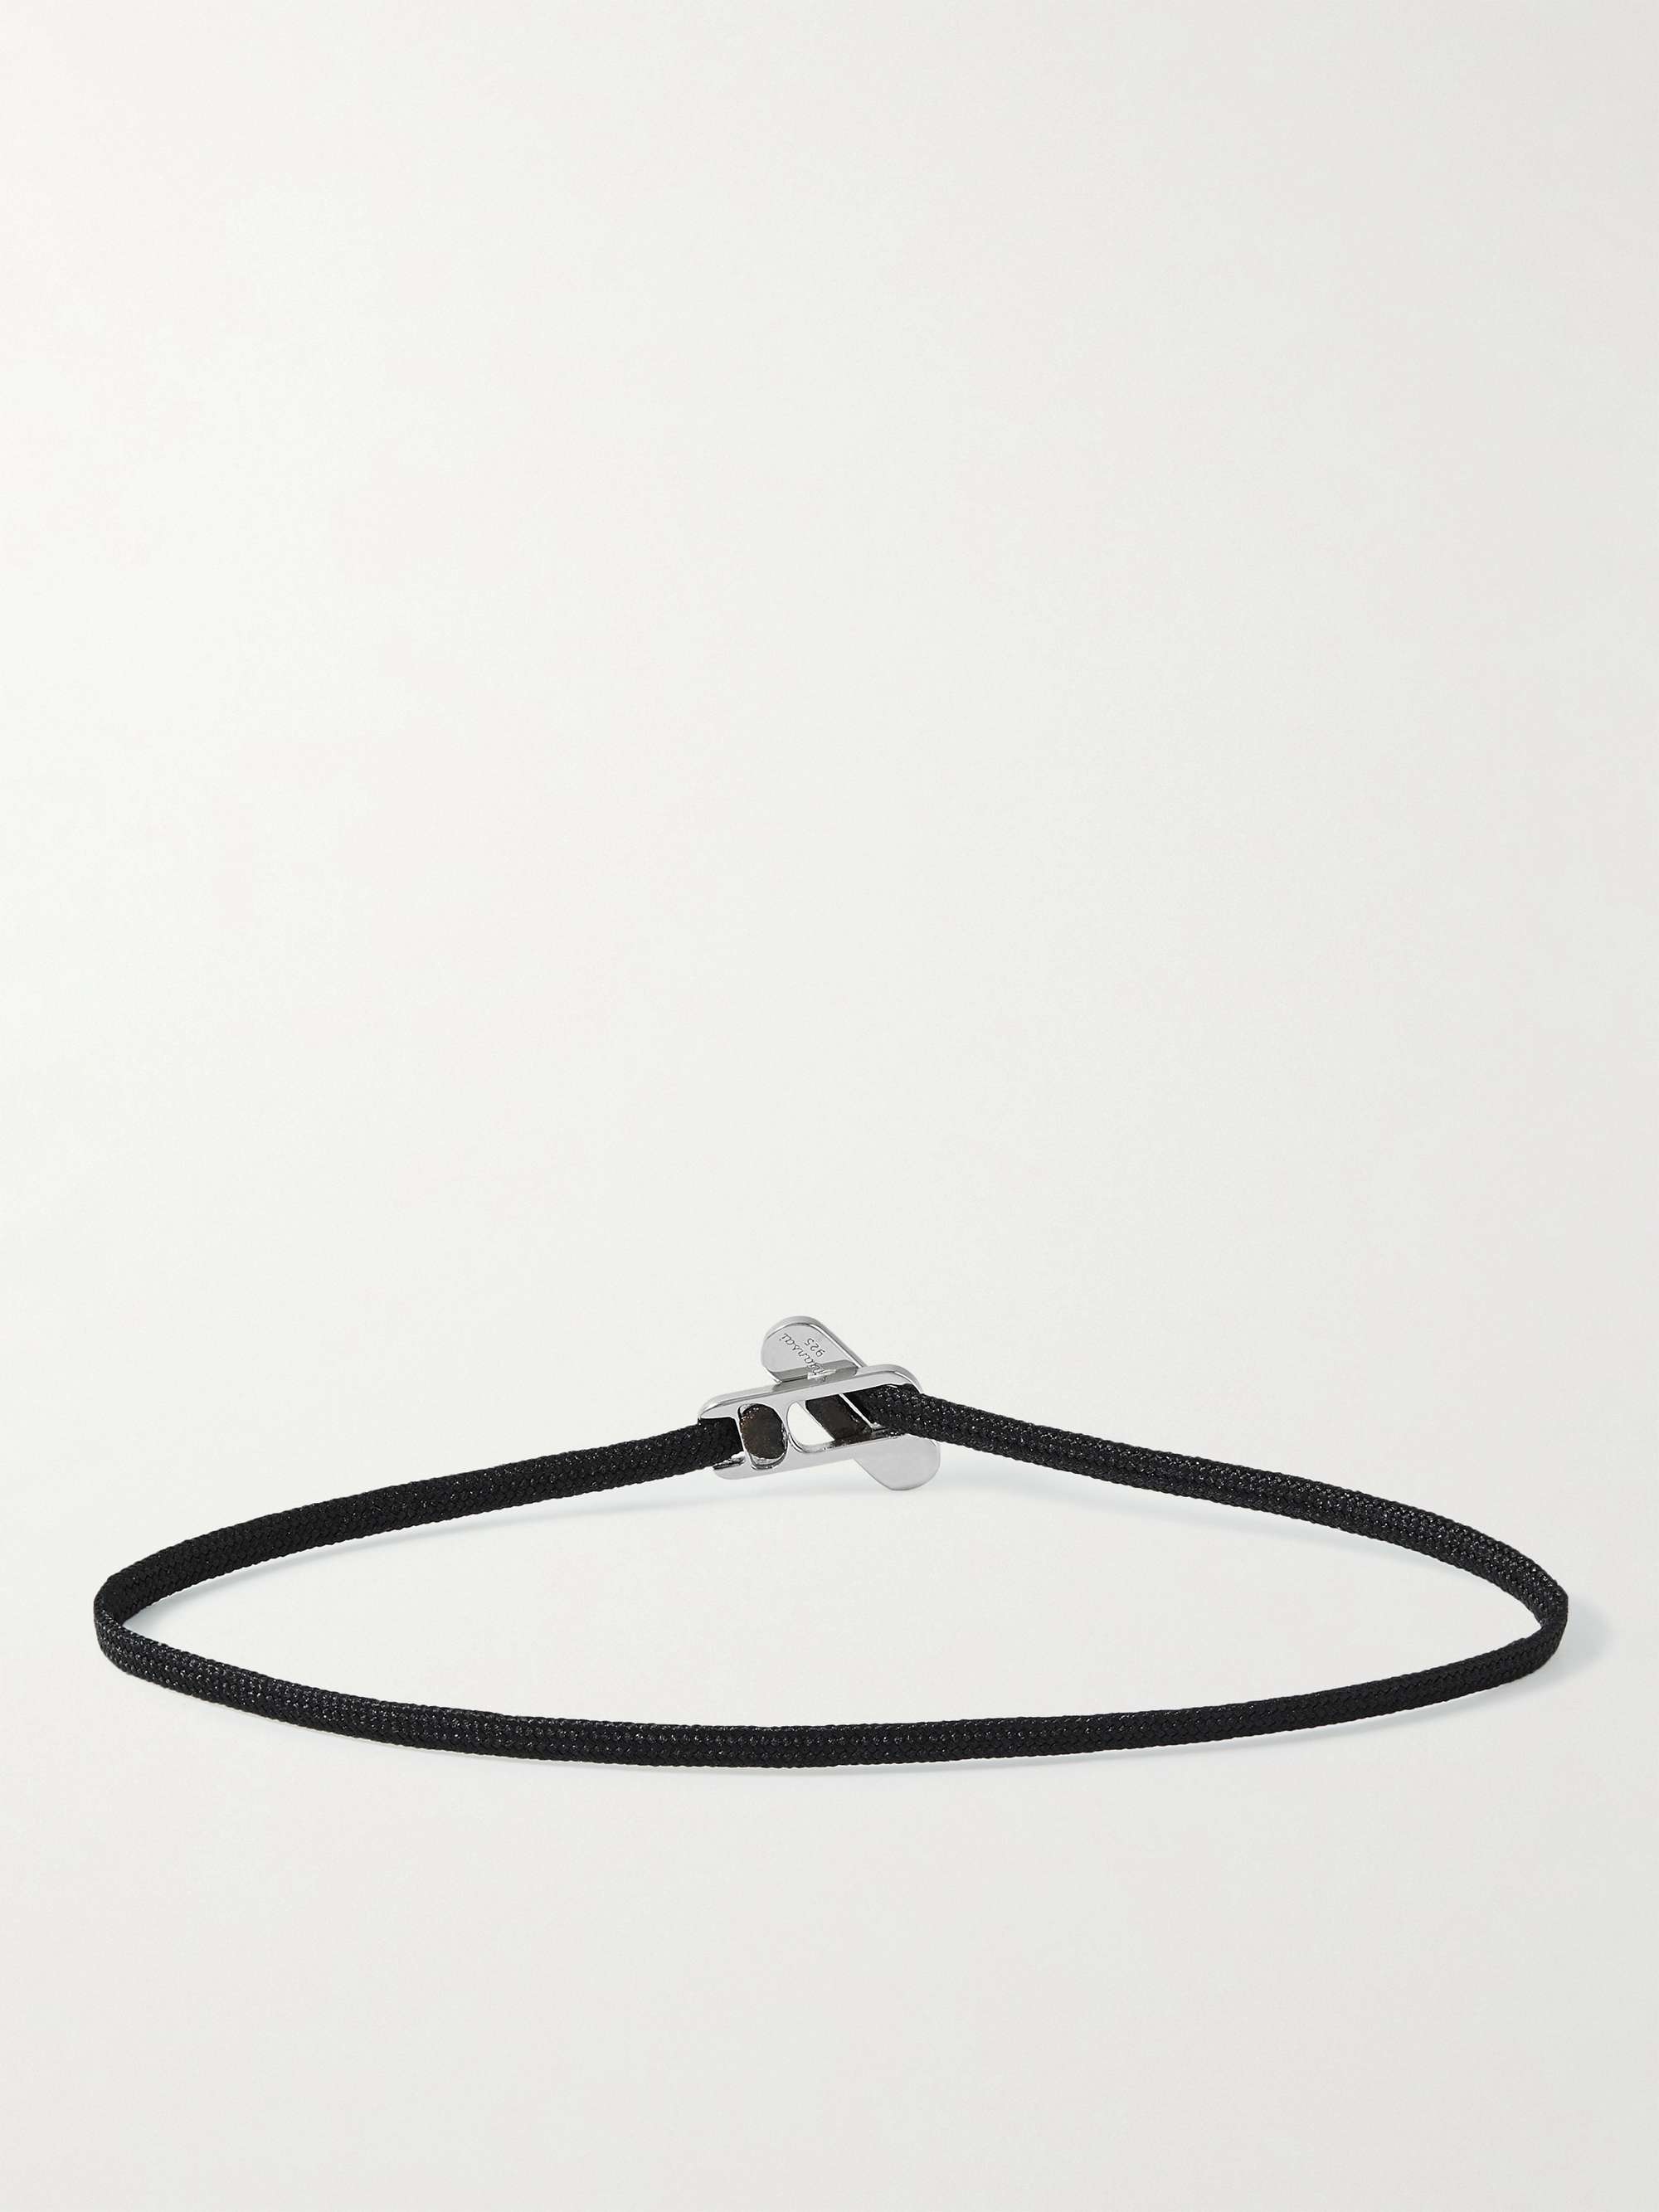 MIANSAI Metric Rope and Sterling Silver Bracelet